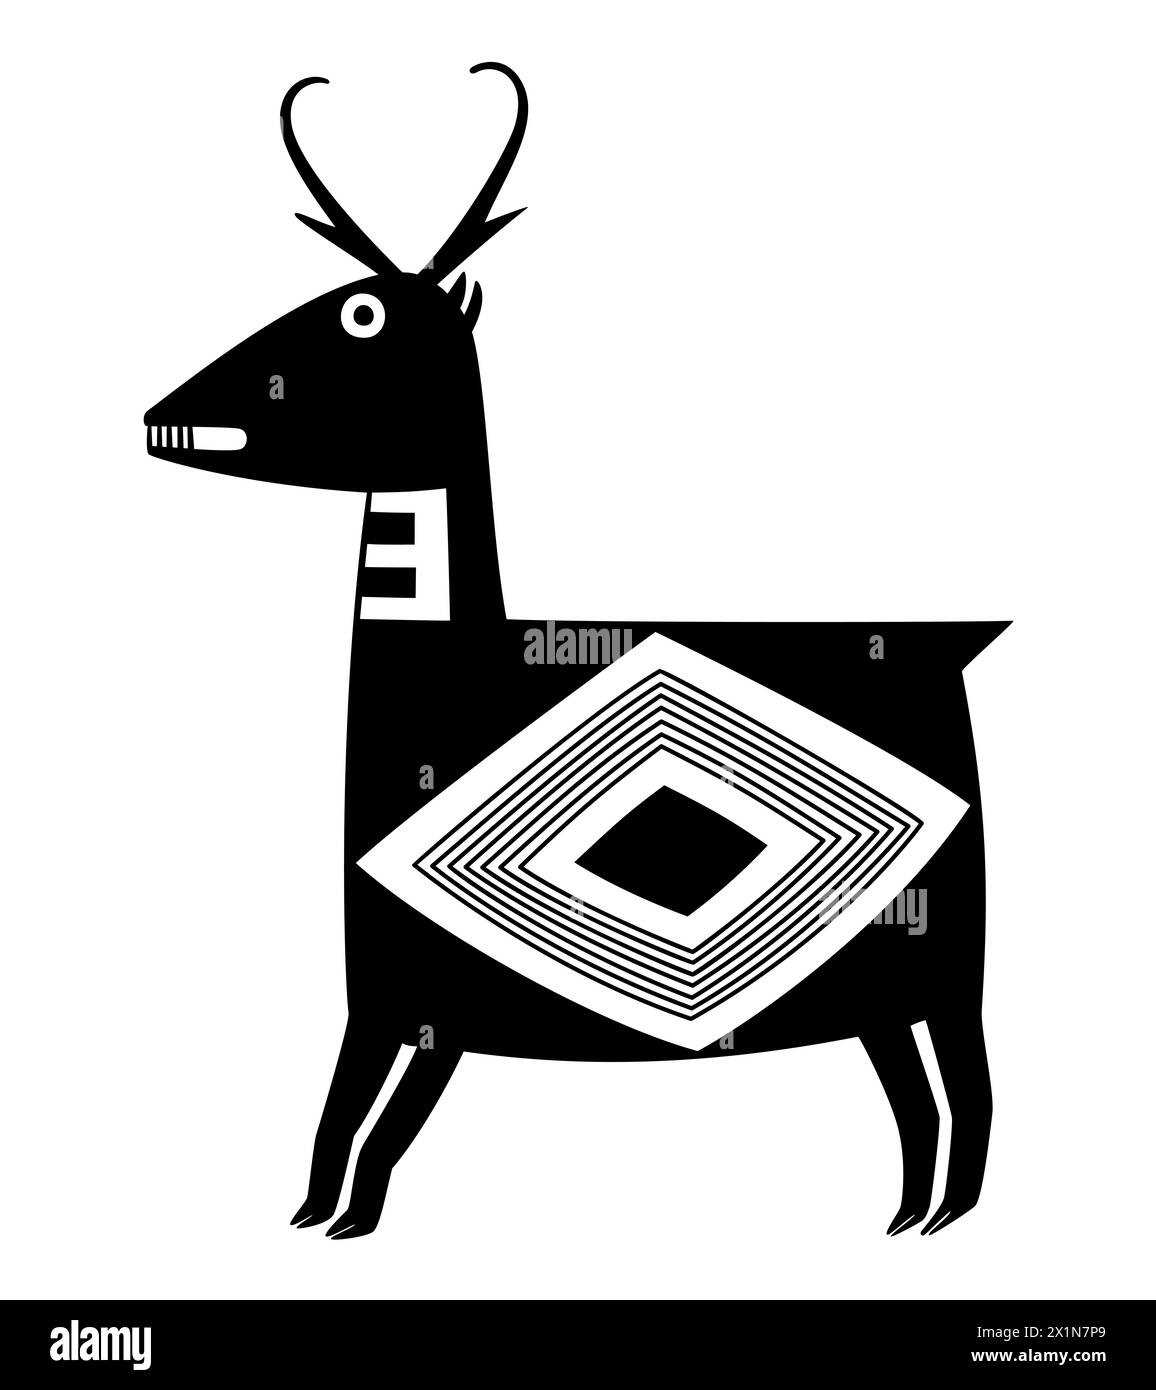 Pronghorn antelope, Mangas-Mimbres pottery motif of the Native American Mogollon culture, ca. 1000 CE, New Mexico. Geometric pronghorn. Stock Photo